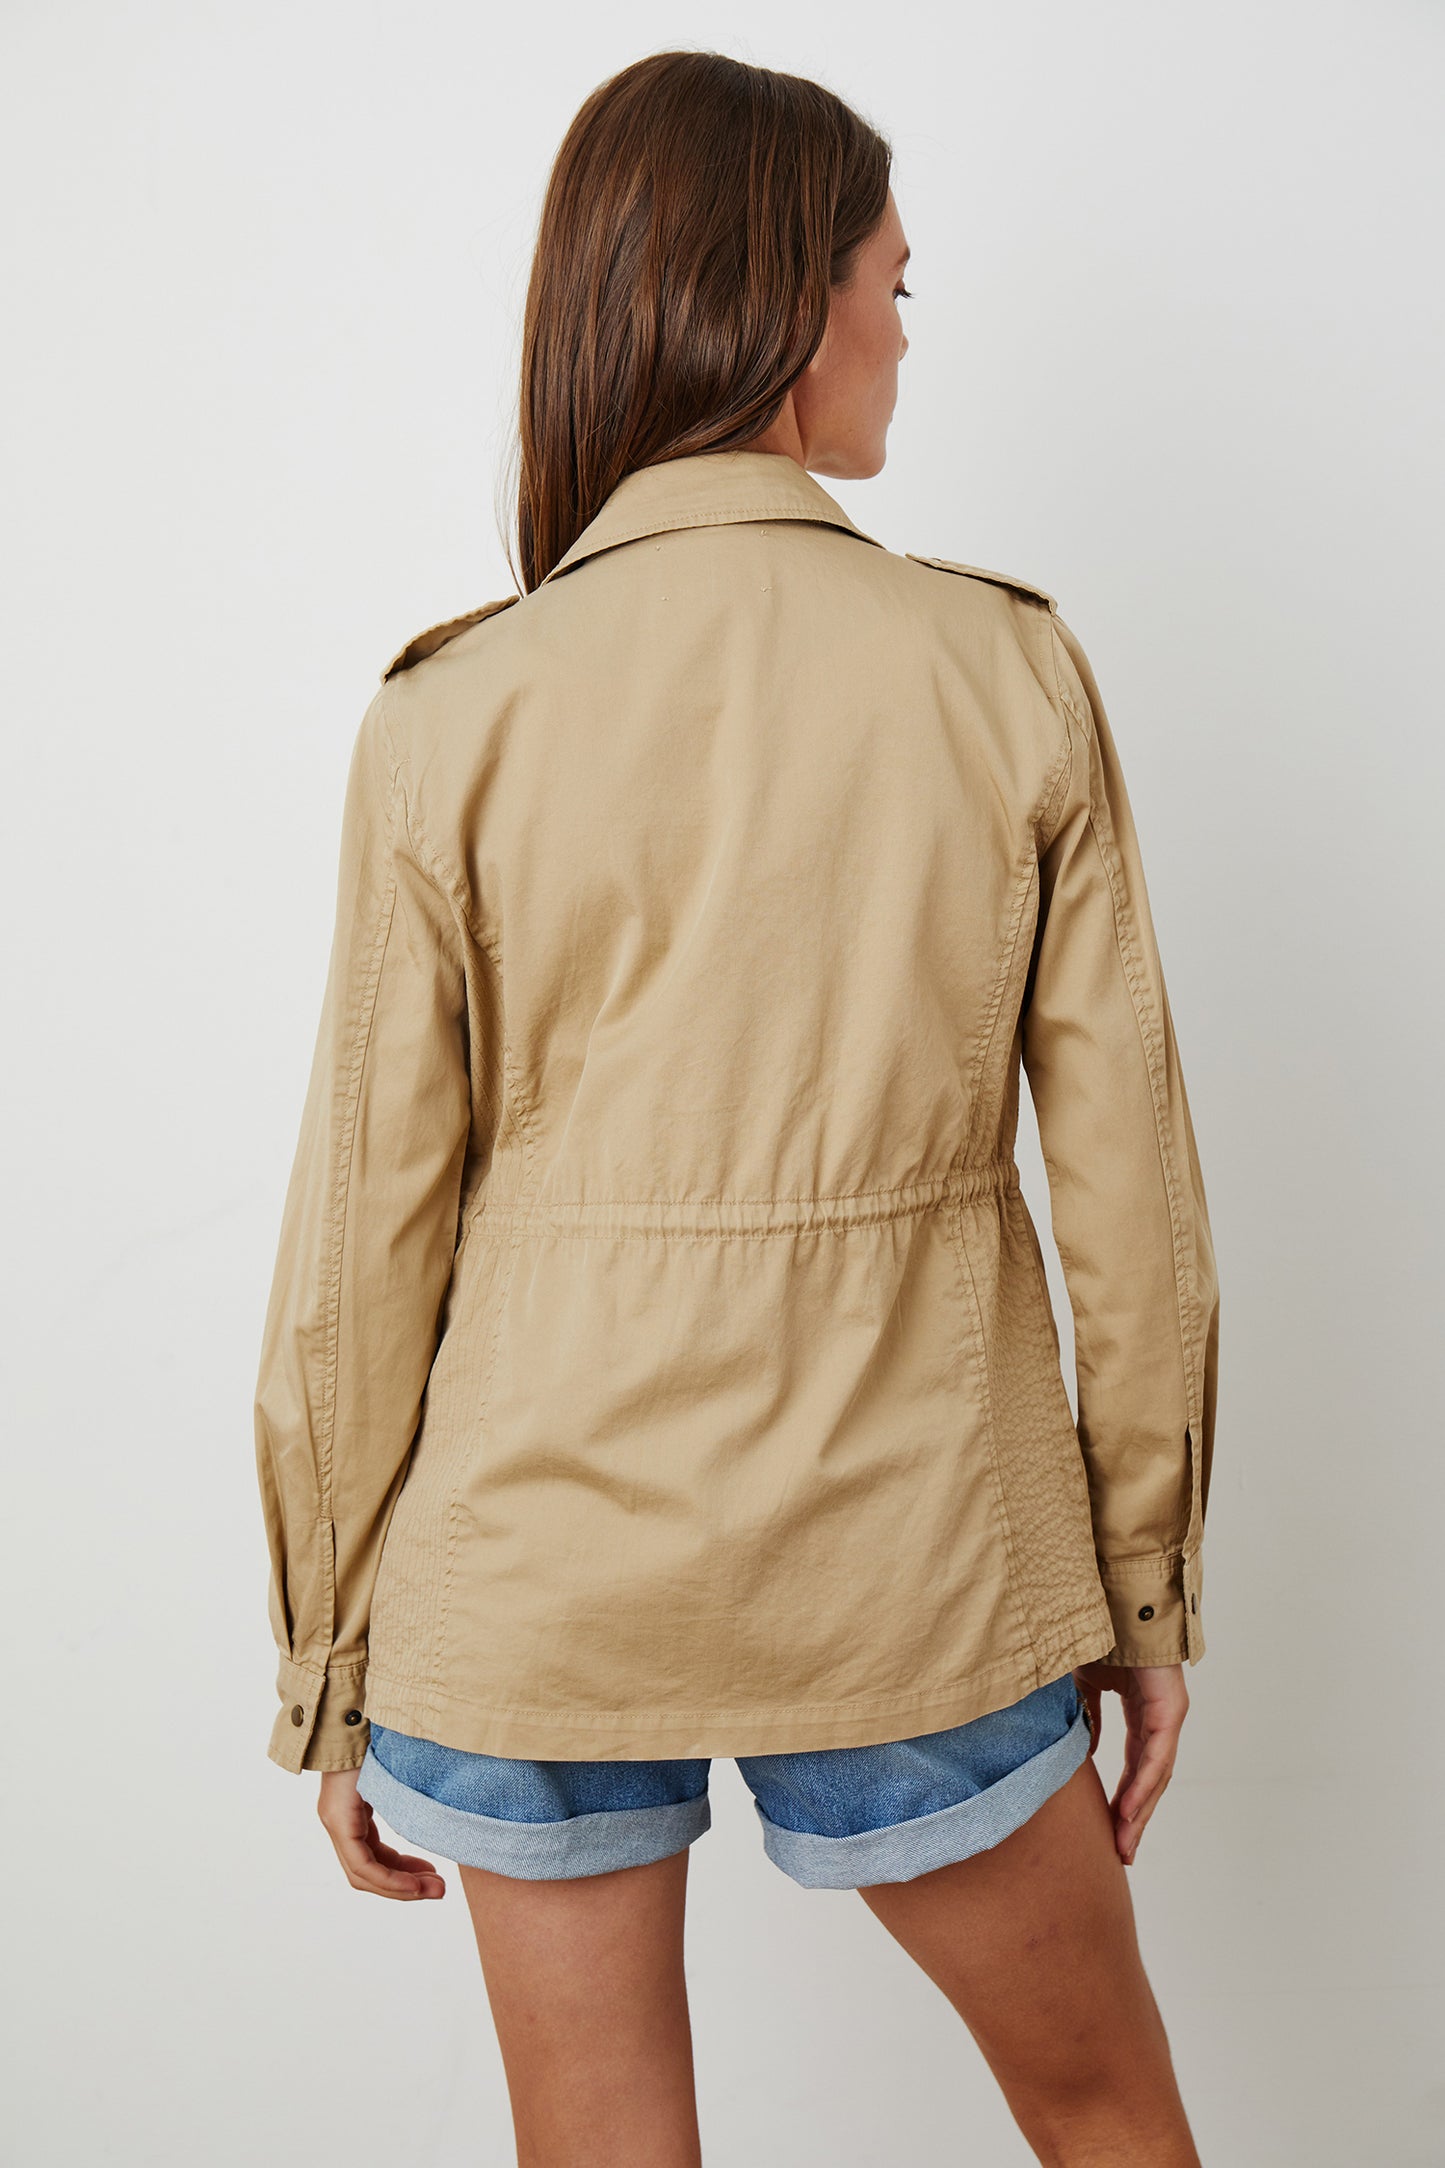 RUBY ARMY JACKET IN SAND